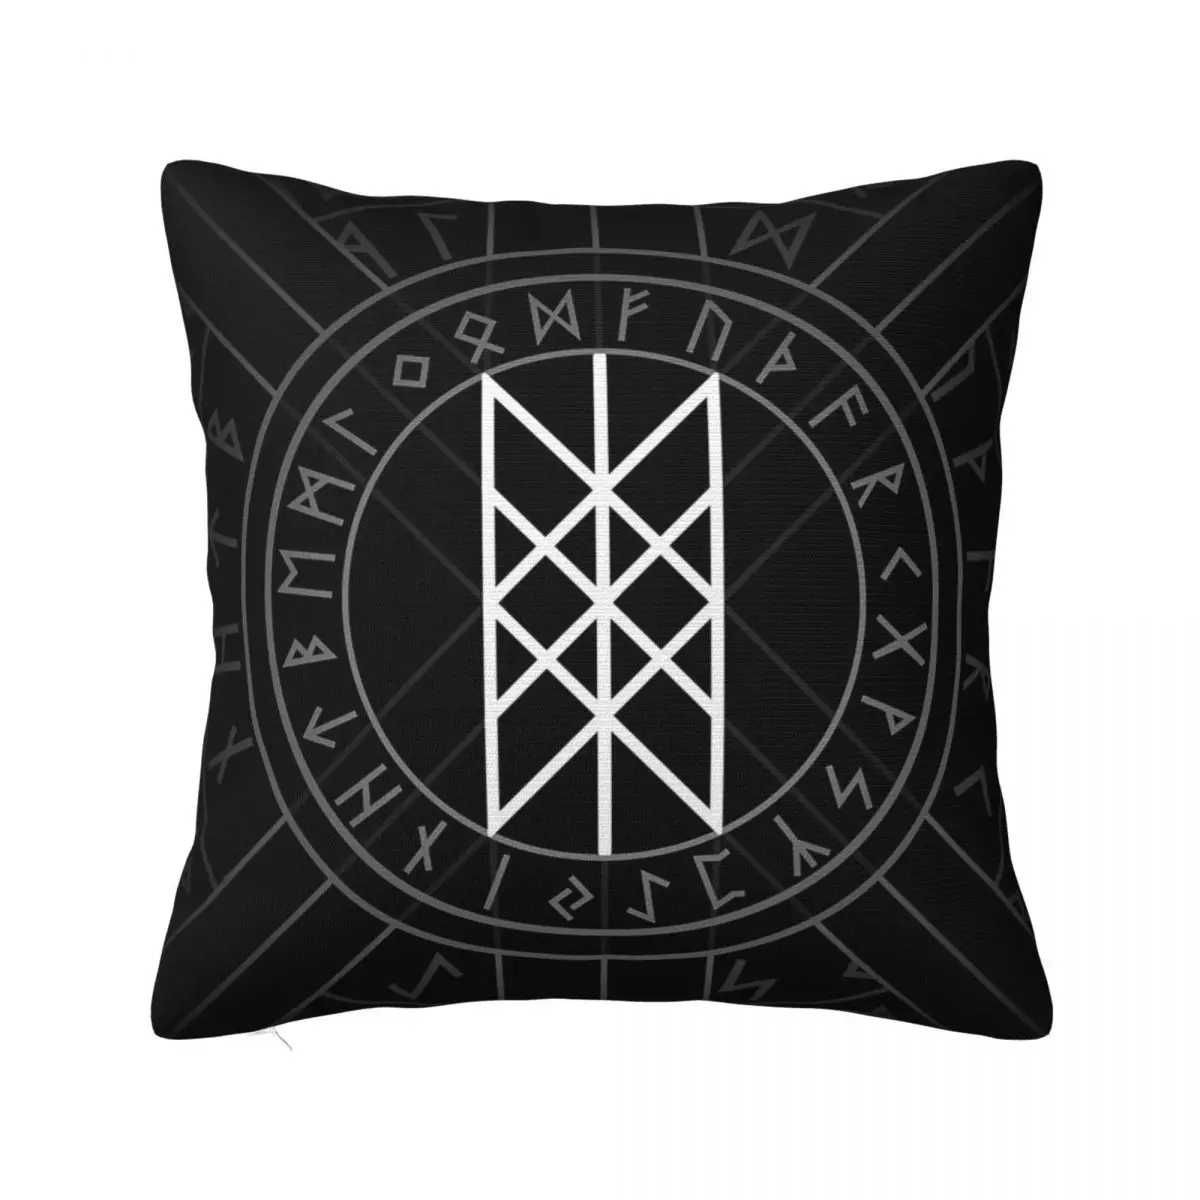 Web Of Wyrd The Matrix Of Fate vikings runes Cushion Cover Decorative Throw Pillow Case Cover for Home Double-sided Printed